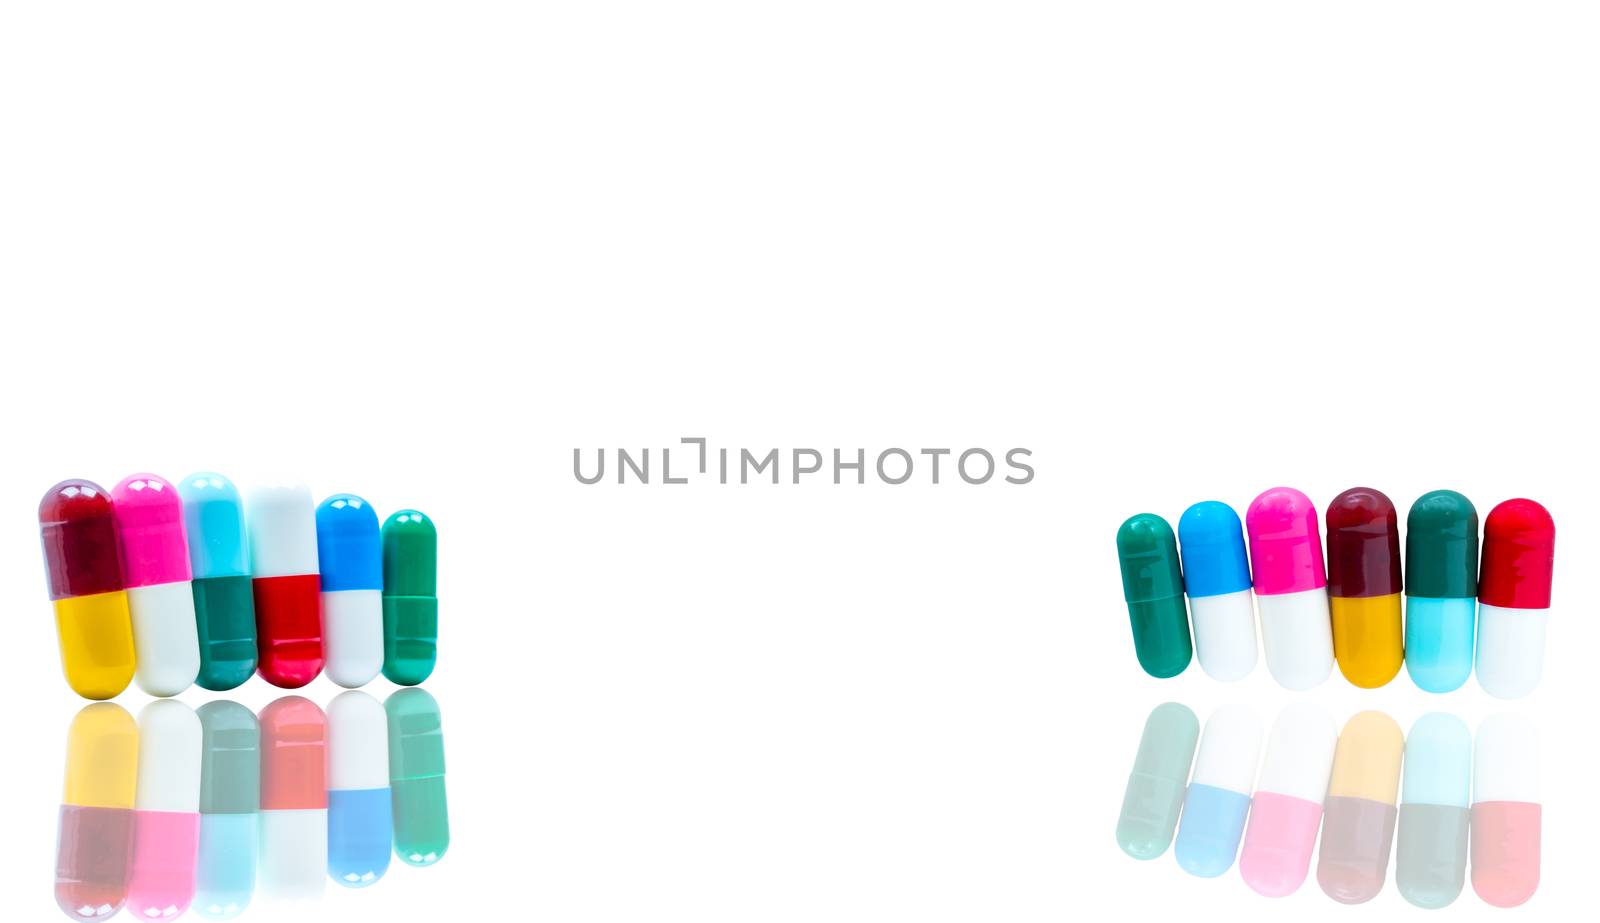 Antibiotic capsules pills in a row on white background with shadows and copy space. Drug resistance concept. Antibiotics drug use with reasonable and global healthcare concept. Pharmaceutical industry. Pharmacy background. Health budgets and policy. by Fahroni